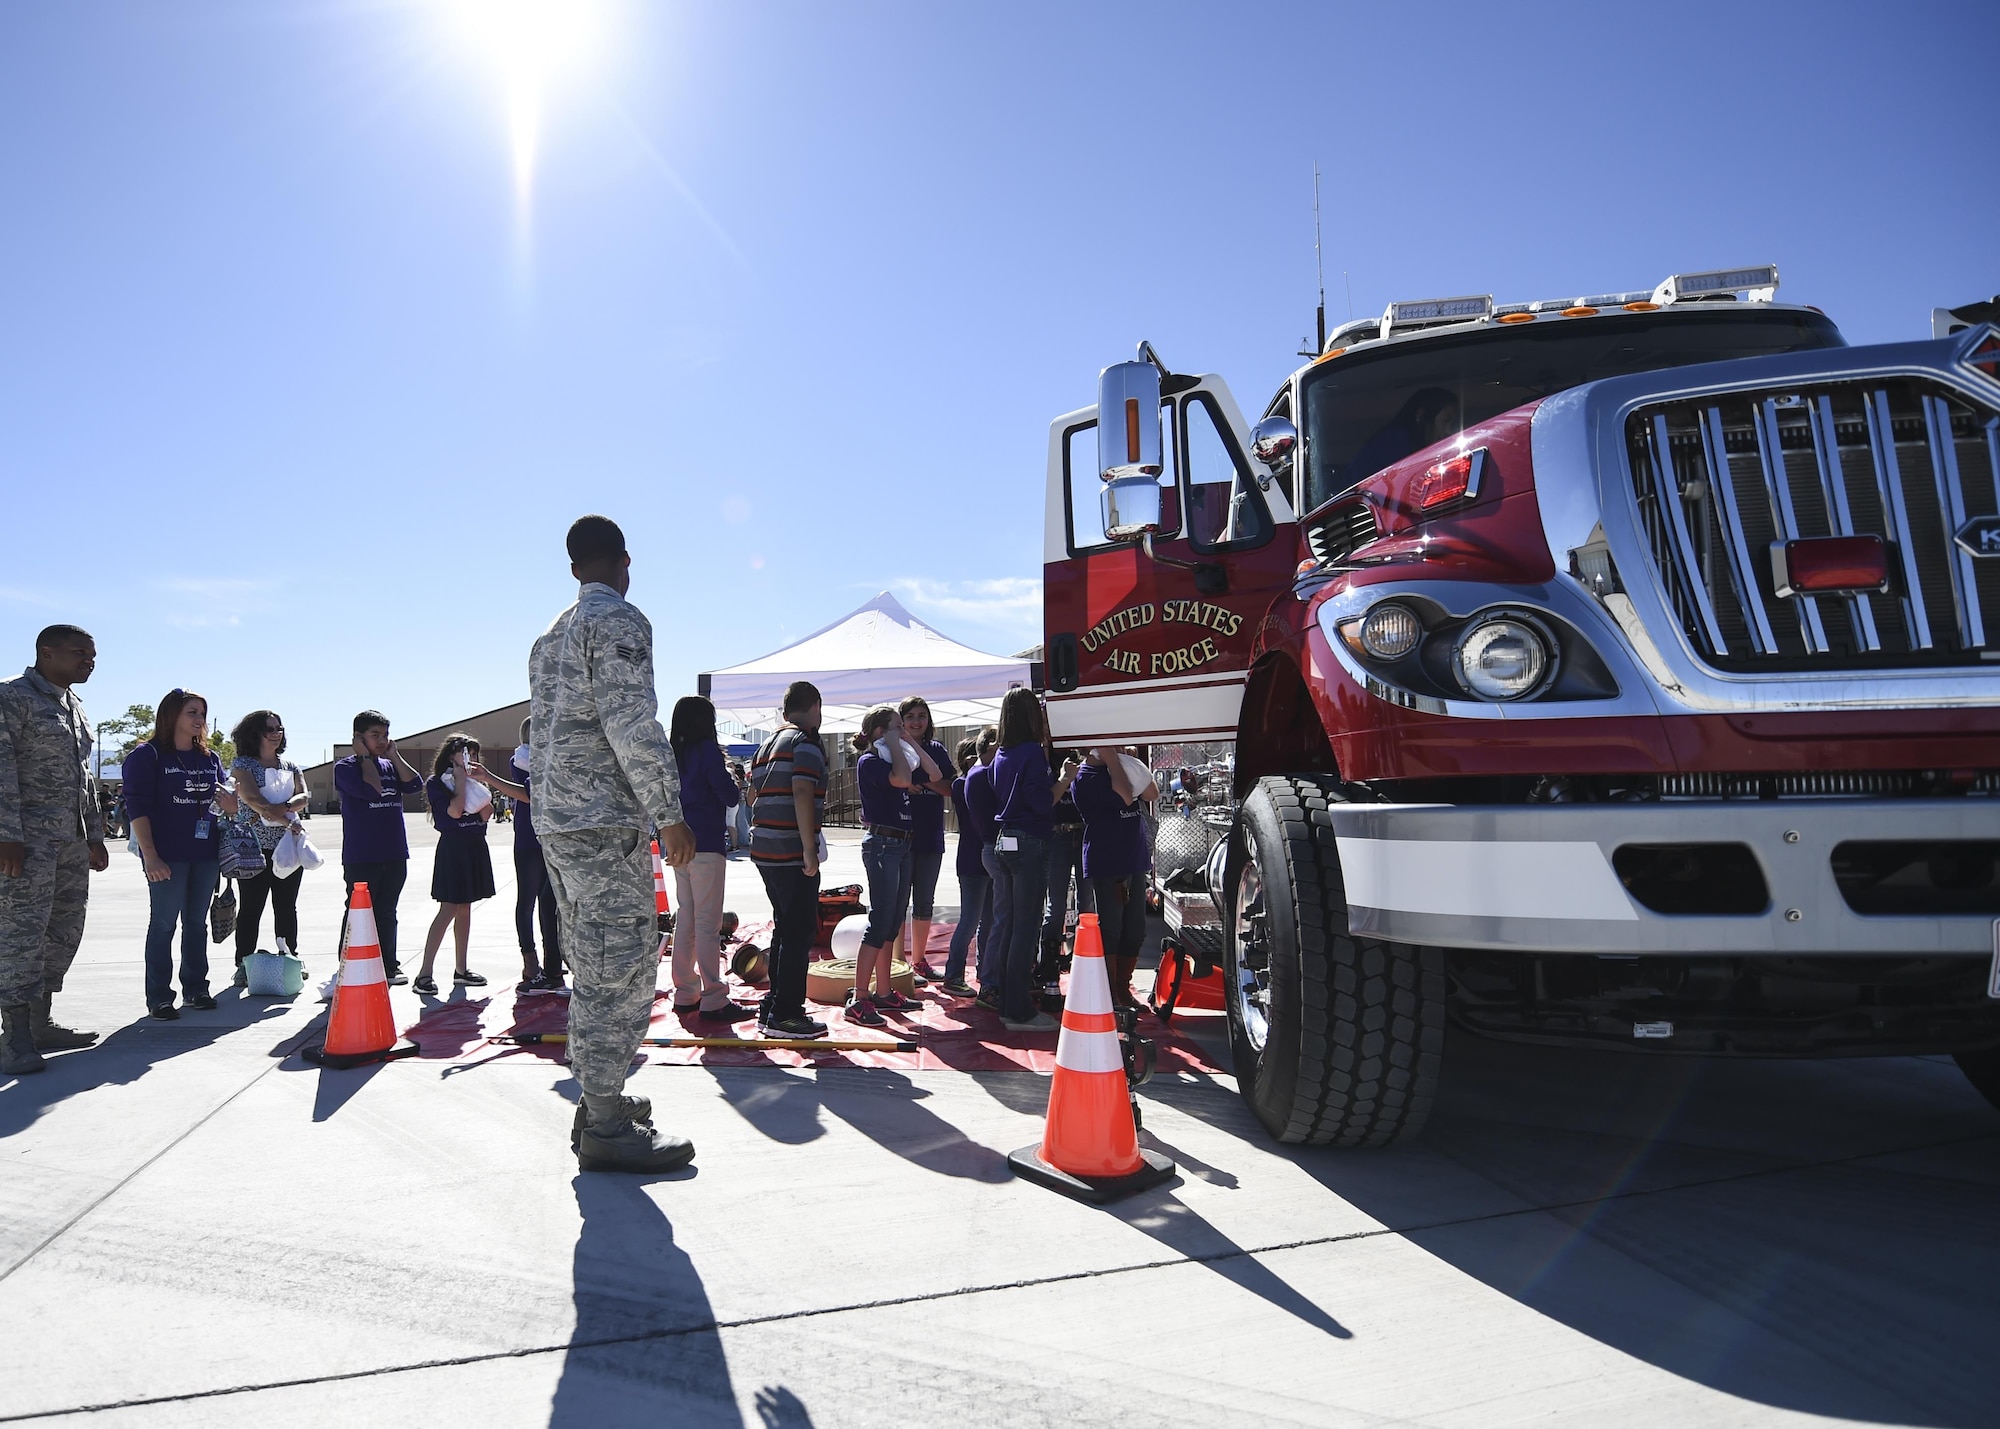 Fire Fighters from the 49th Civil Engineer squadron show children a fire truck during the fourth annual New Mexico Aviation Aerospace Association Career Expo Oct. 6, 2016 at Holloman Air Force Base N.M. About 2,500 middle school through college-level students from across New Mexico came out to learn about the science, technology, engineering and mathematics fields. The goal of STEM is to motivate and educate students by giving them a taste of what aviation and aerospace engineering is all about. These STEM events also get the students talking to people who are working directly in STEM industries.  (U.S. Air Force photo by Staff Sgt. Stacy Jonsgaard)